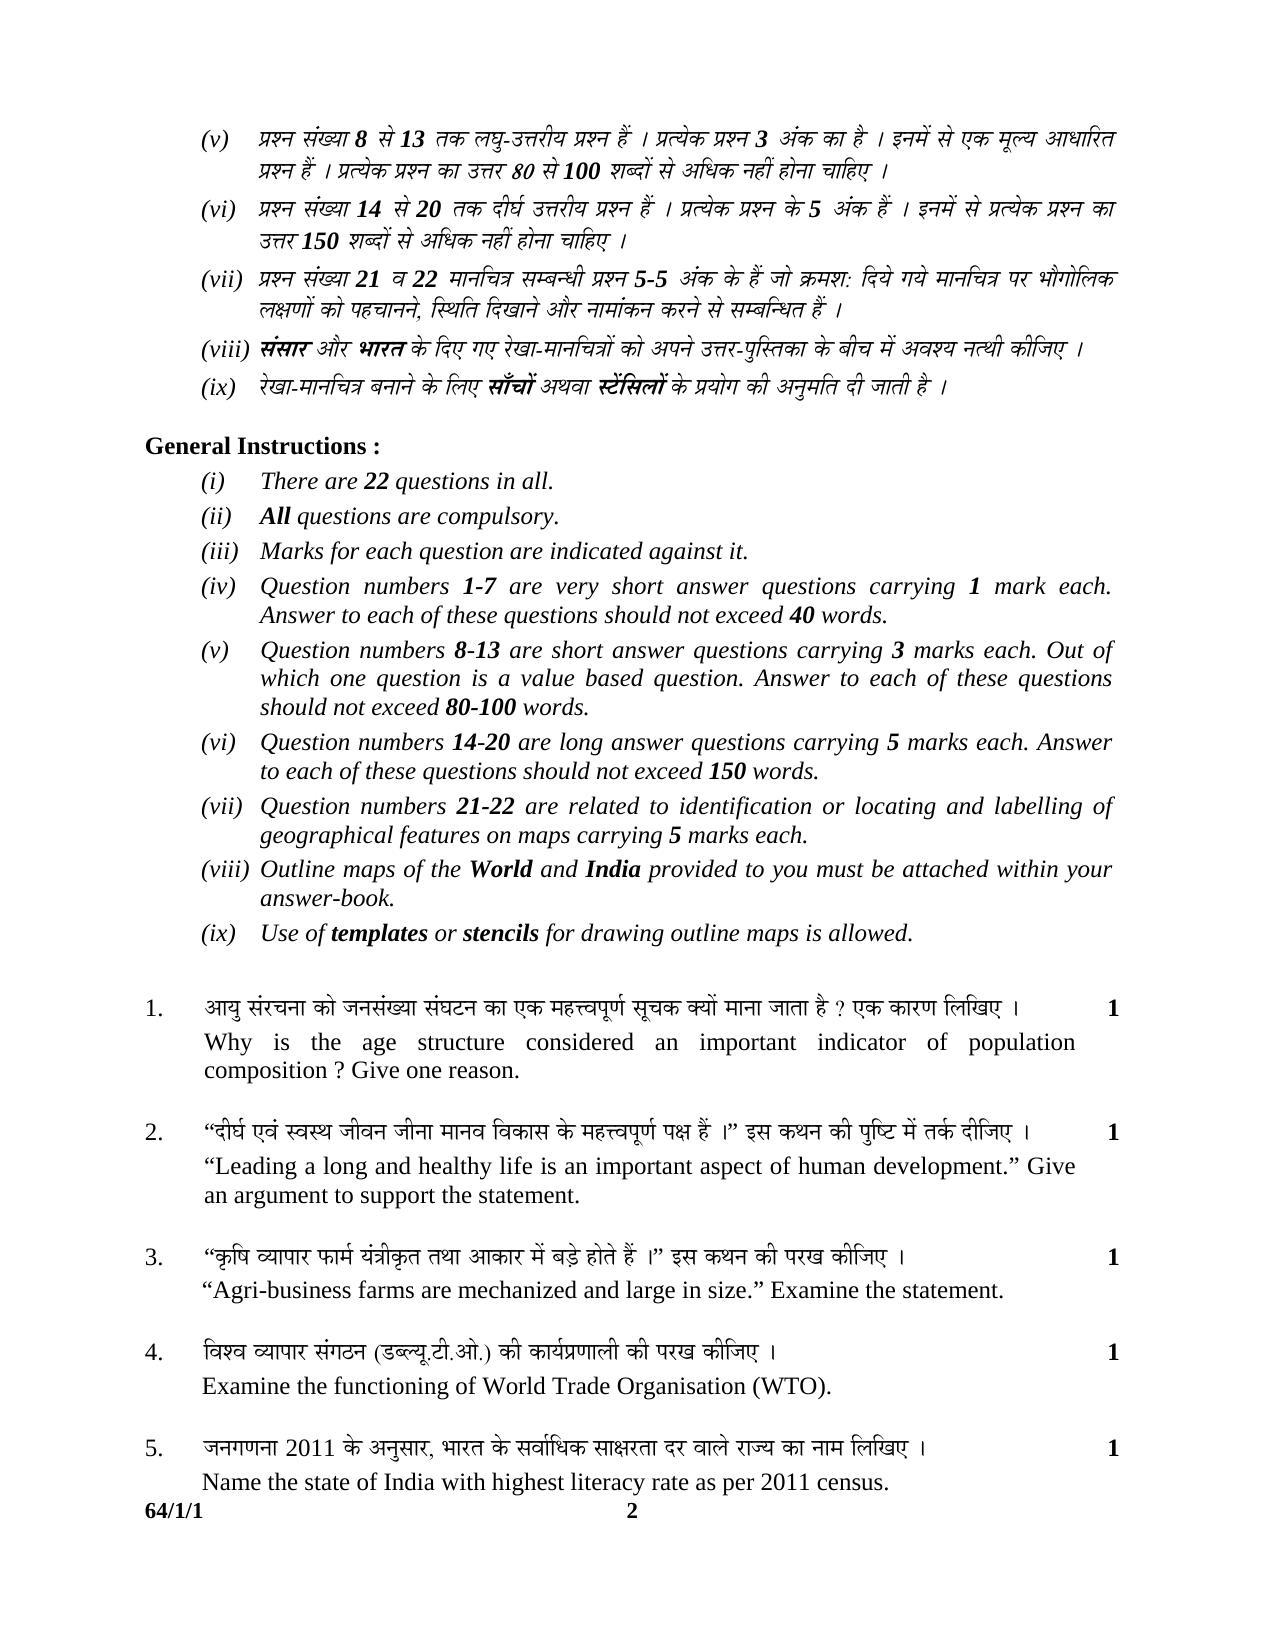 CBSE Class 12 64-1-1 GEOGRAPHY 2016 Question Paper - Page 2